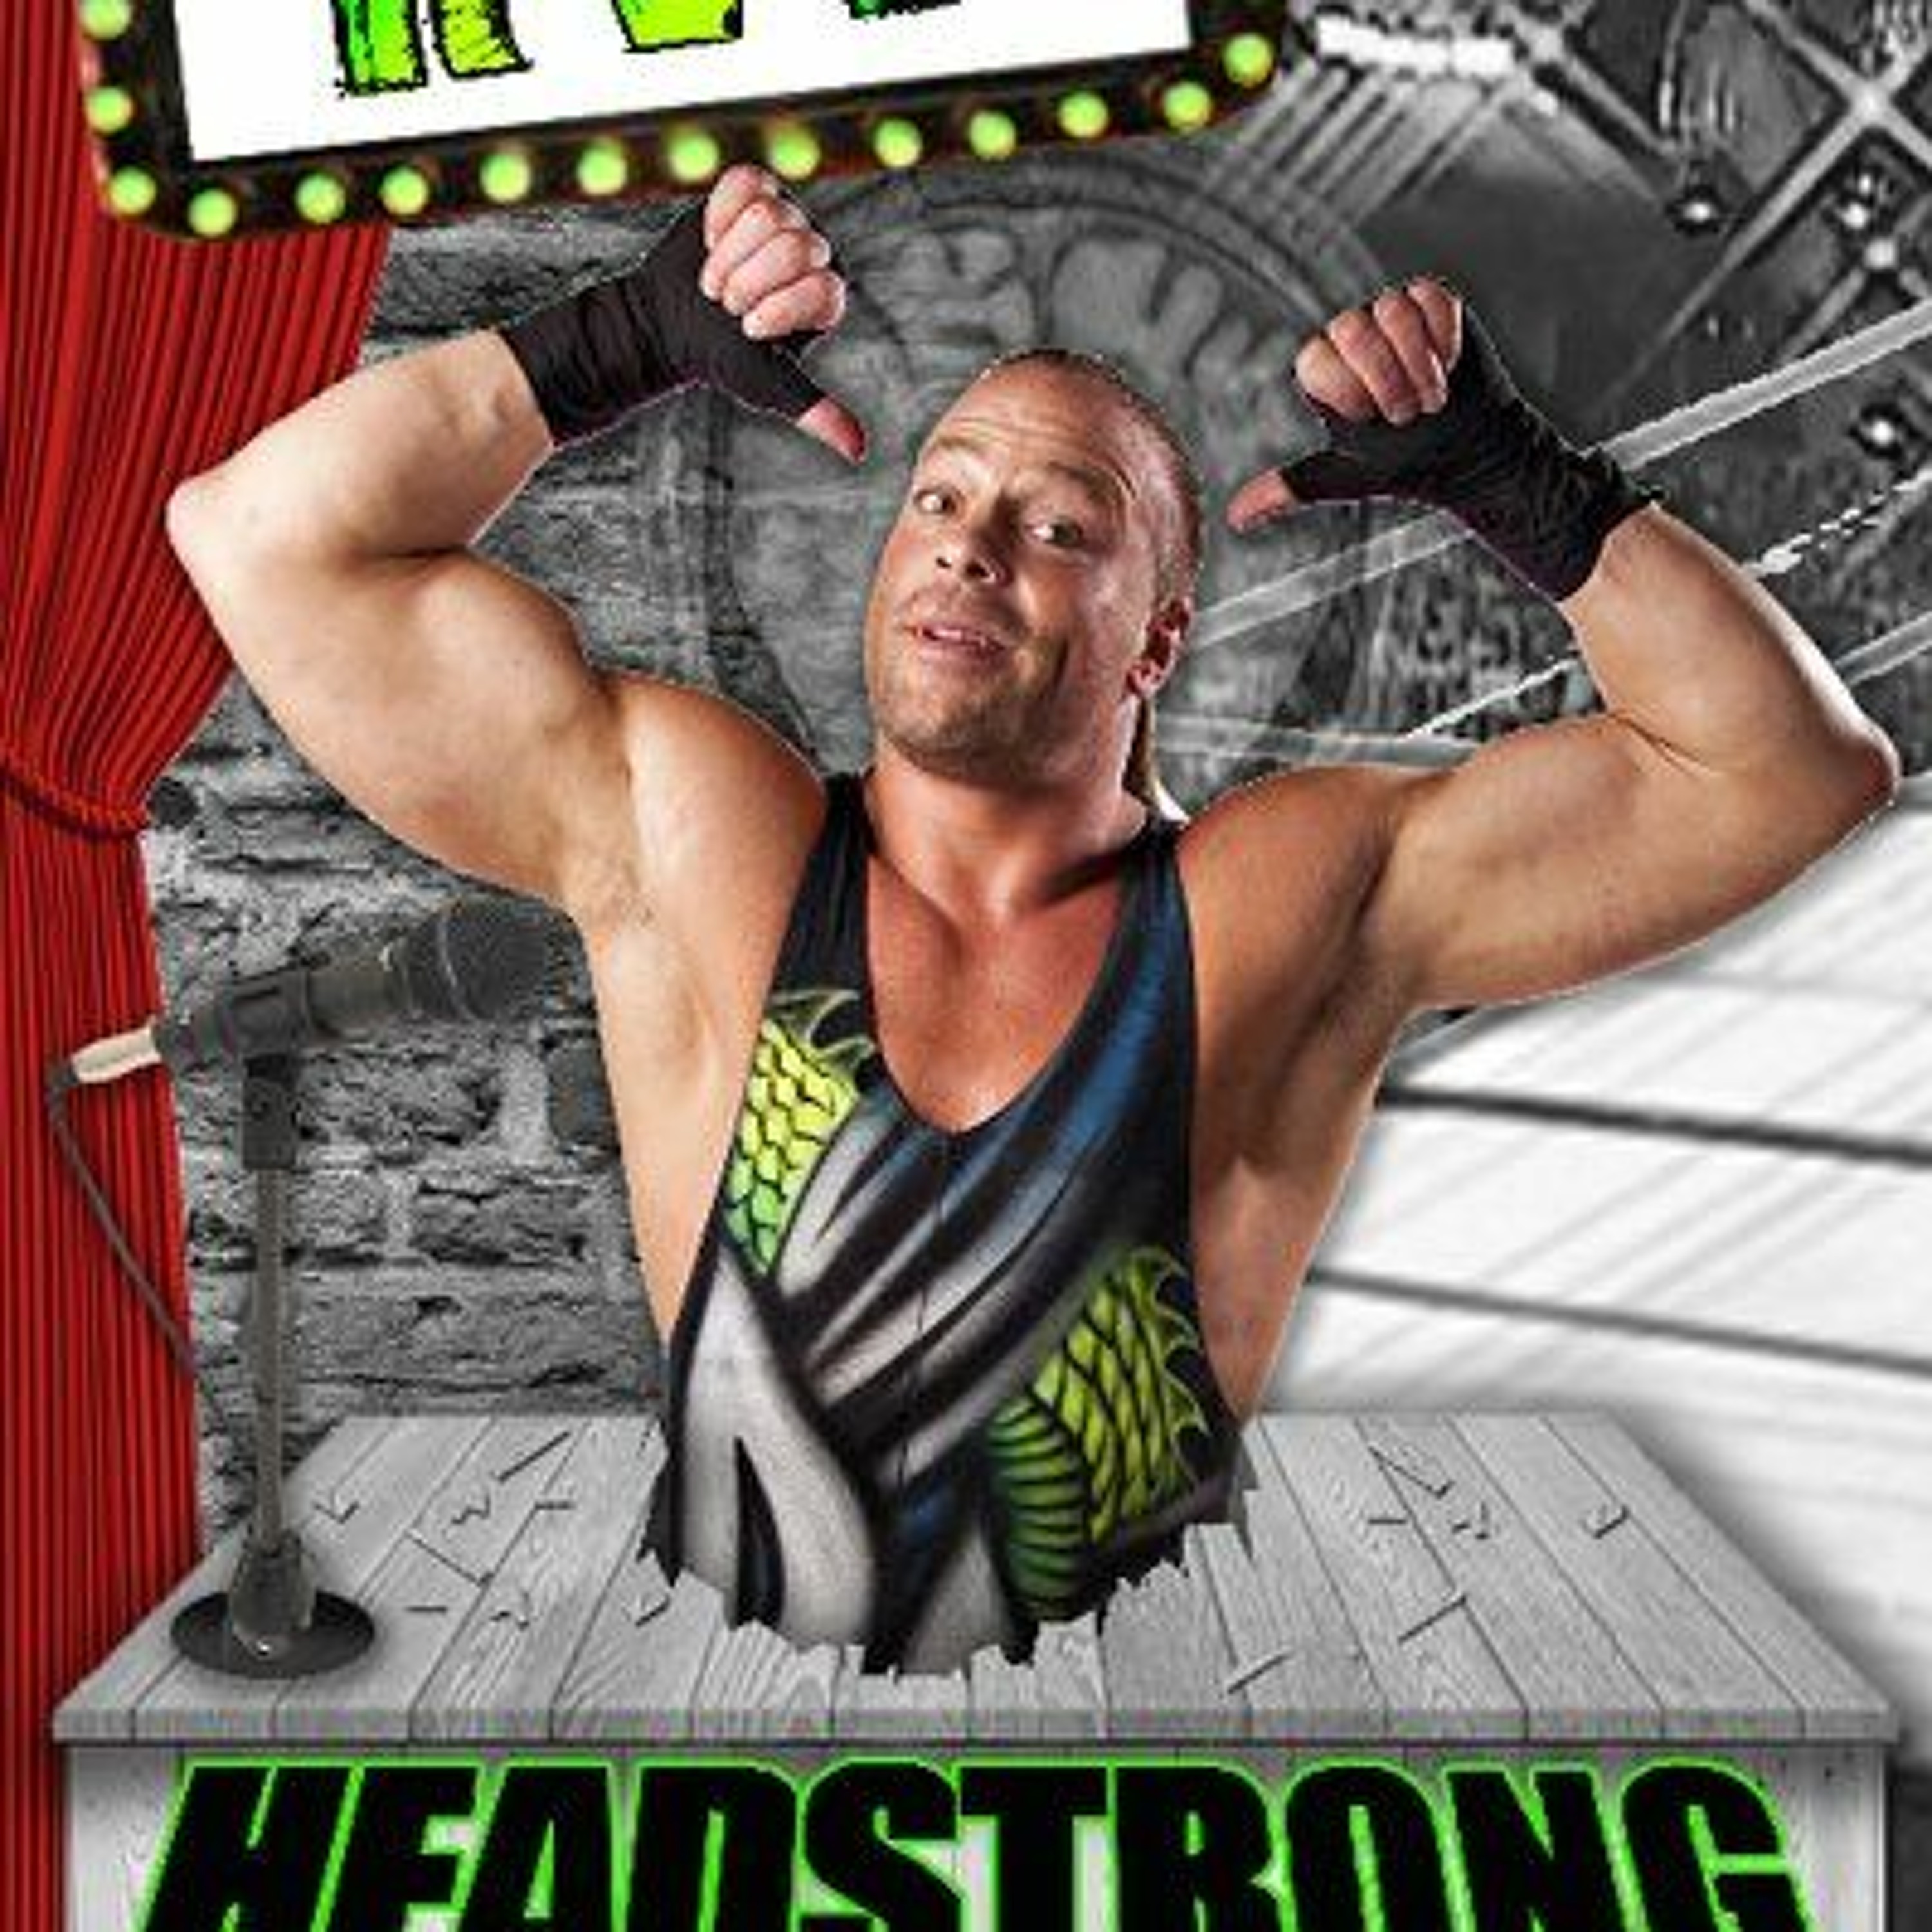 Episode 43 - Rob Van Dam, RVD (Pro Wrestling Champion, 'Headstrong' Producer & subject) Image